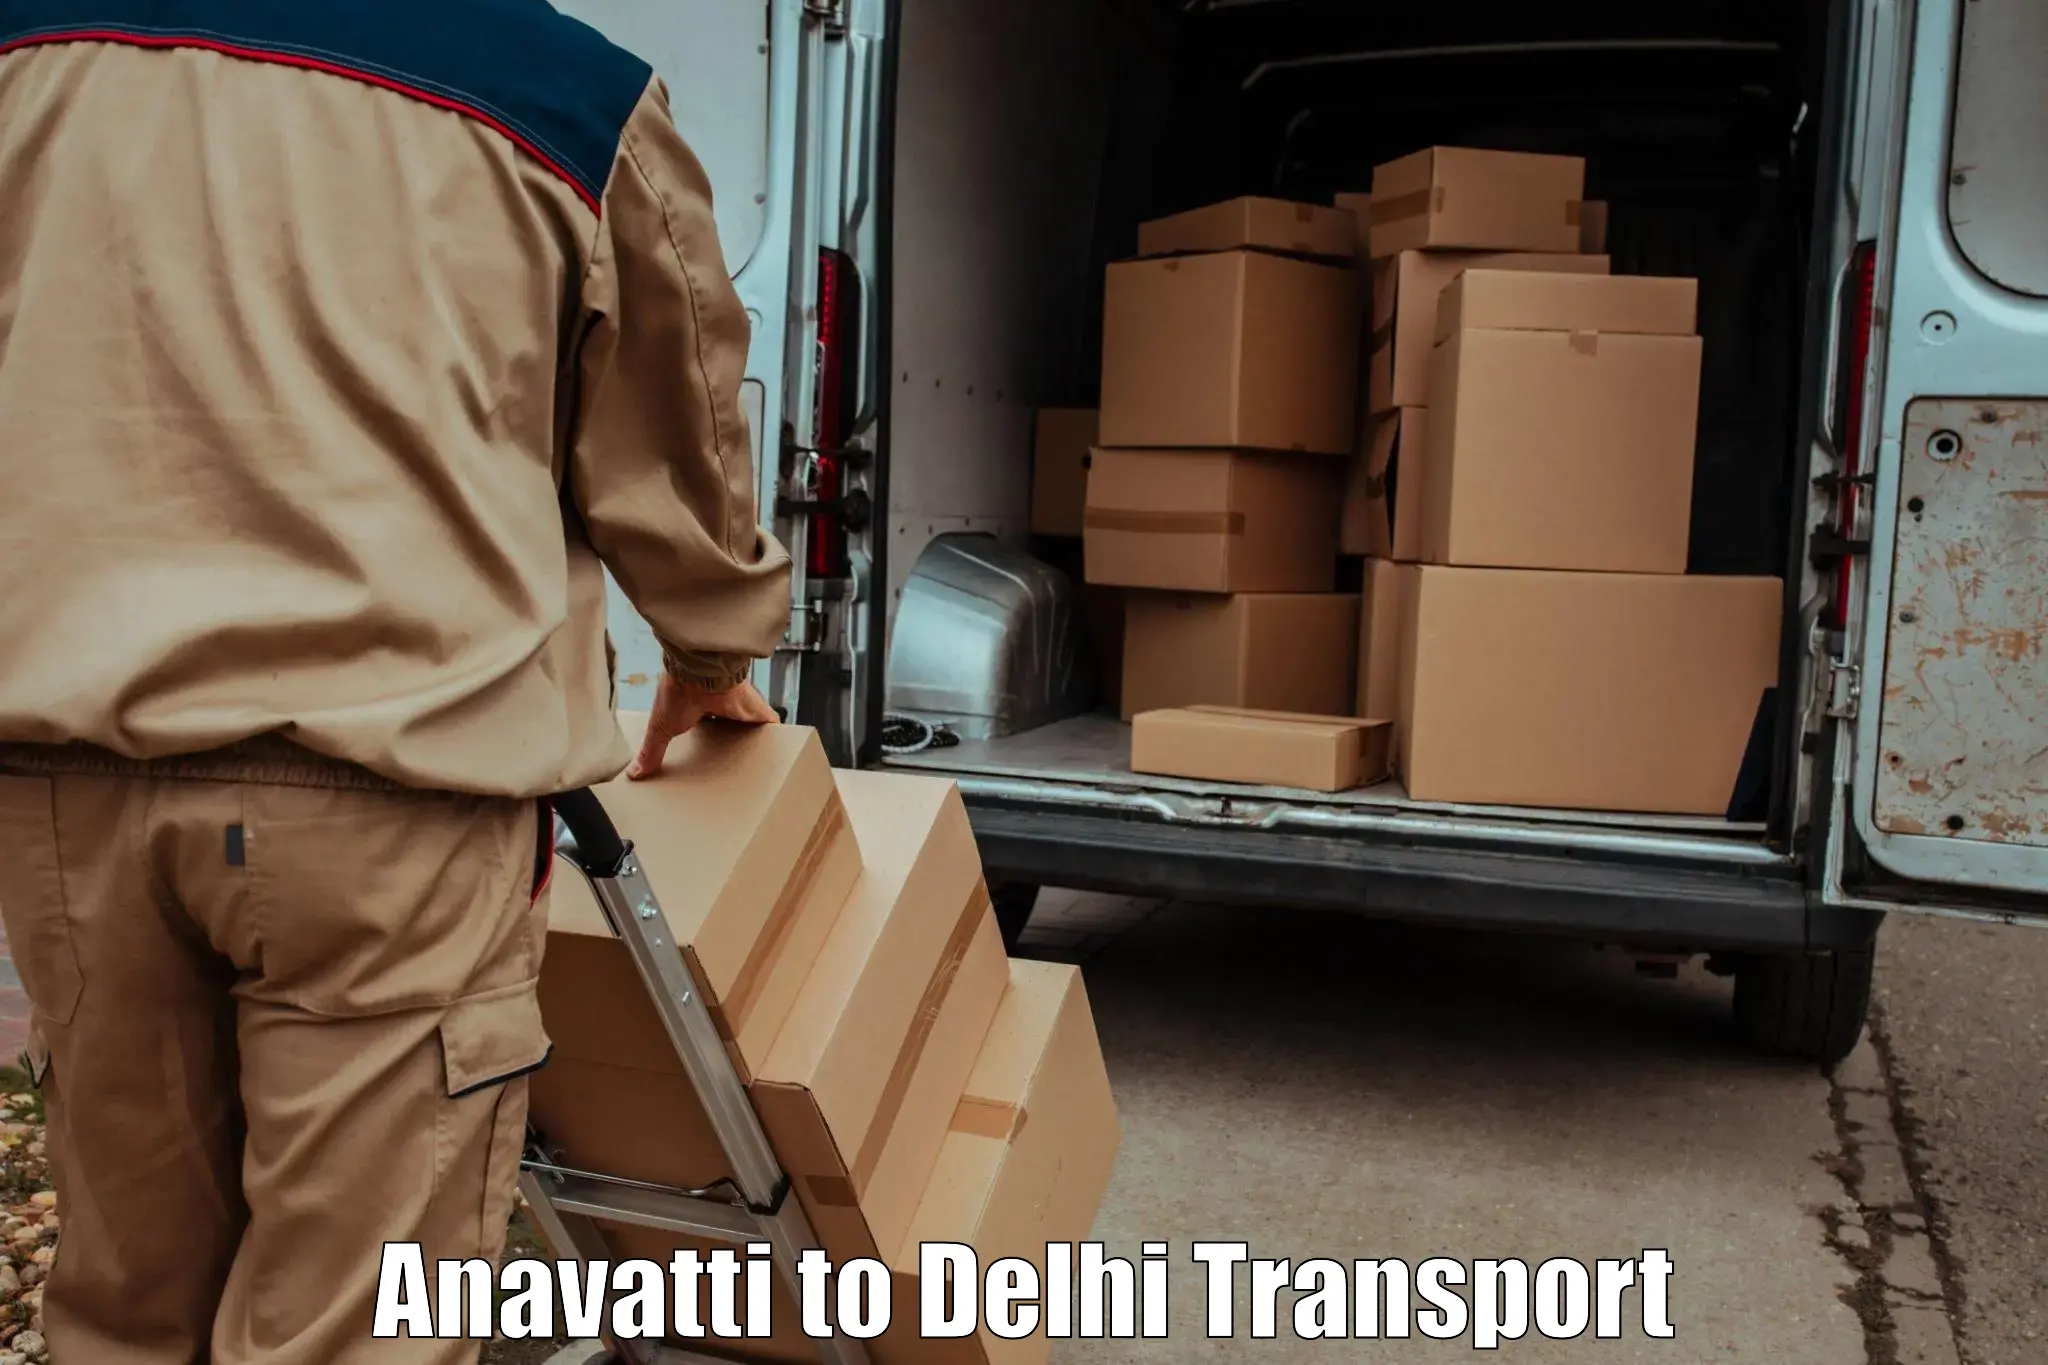 Transport bike from one state to another Anavatti to Delhi Technological University DTU